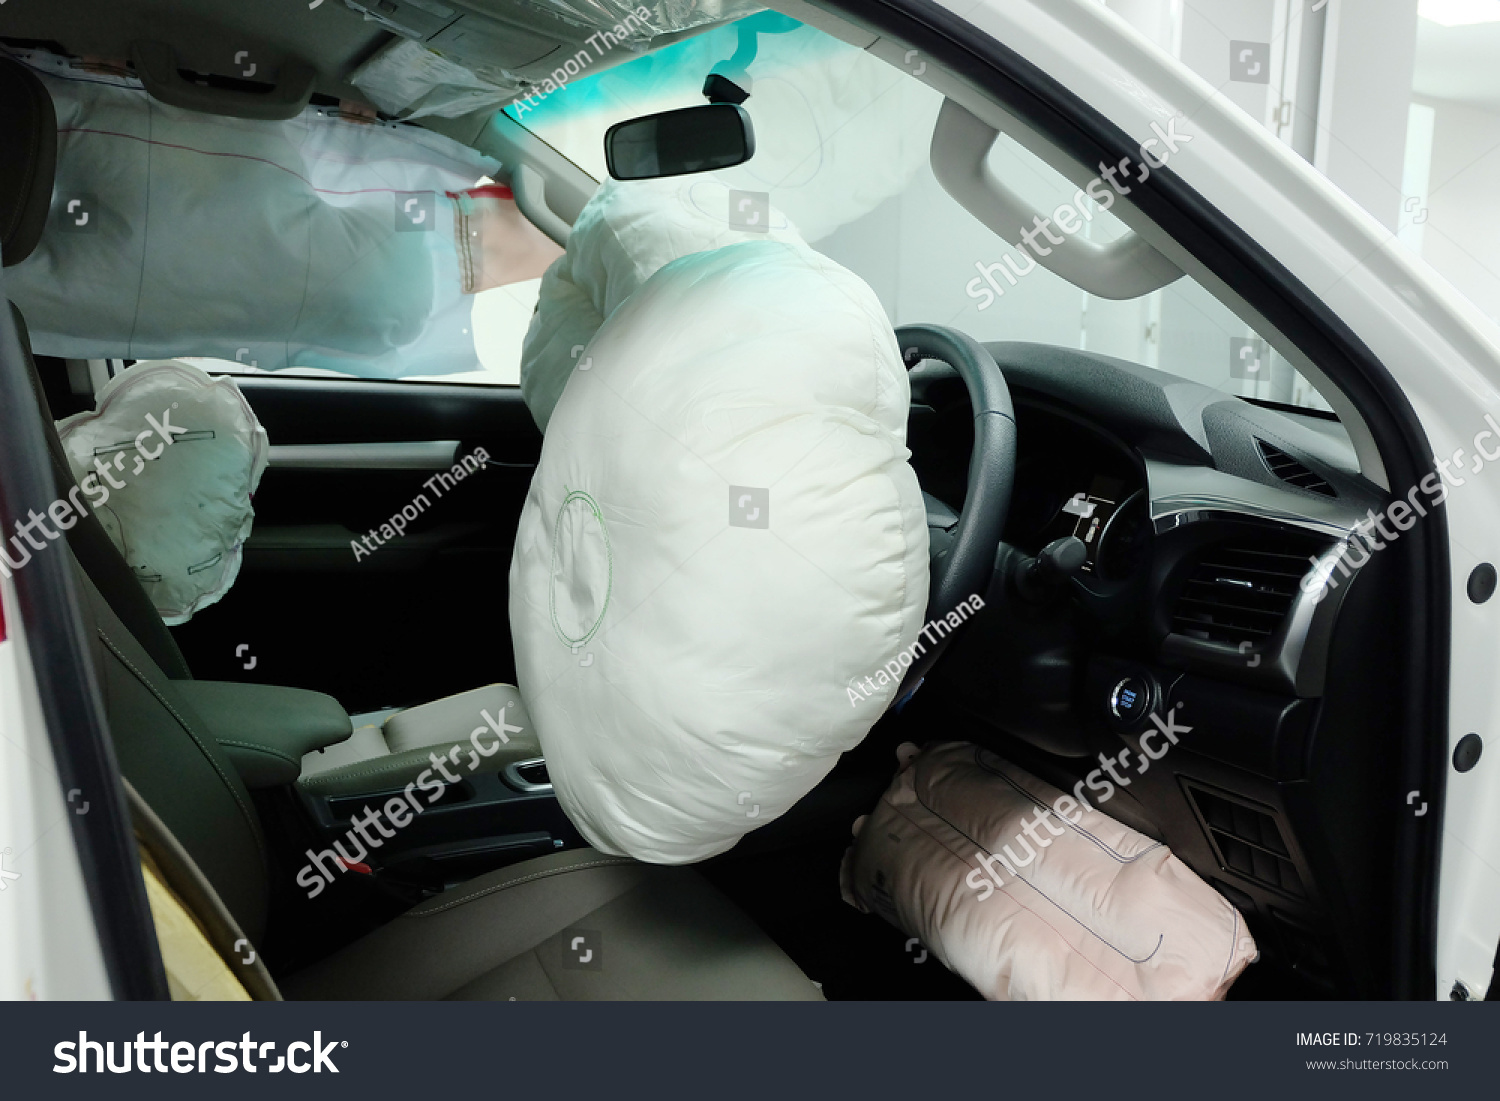 Air bags, Passive Safety Features. #719835124